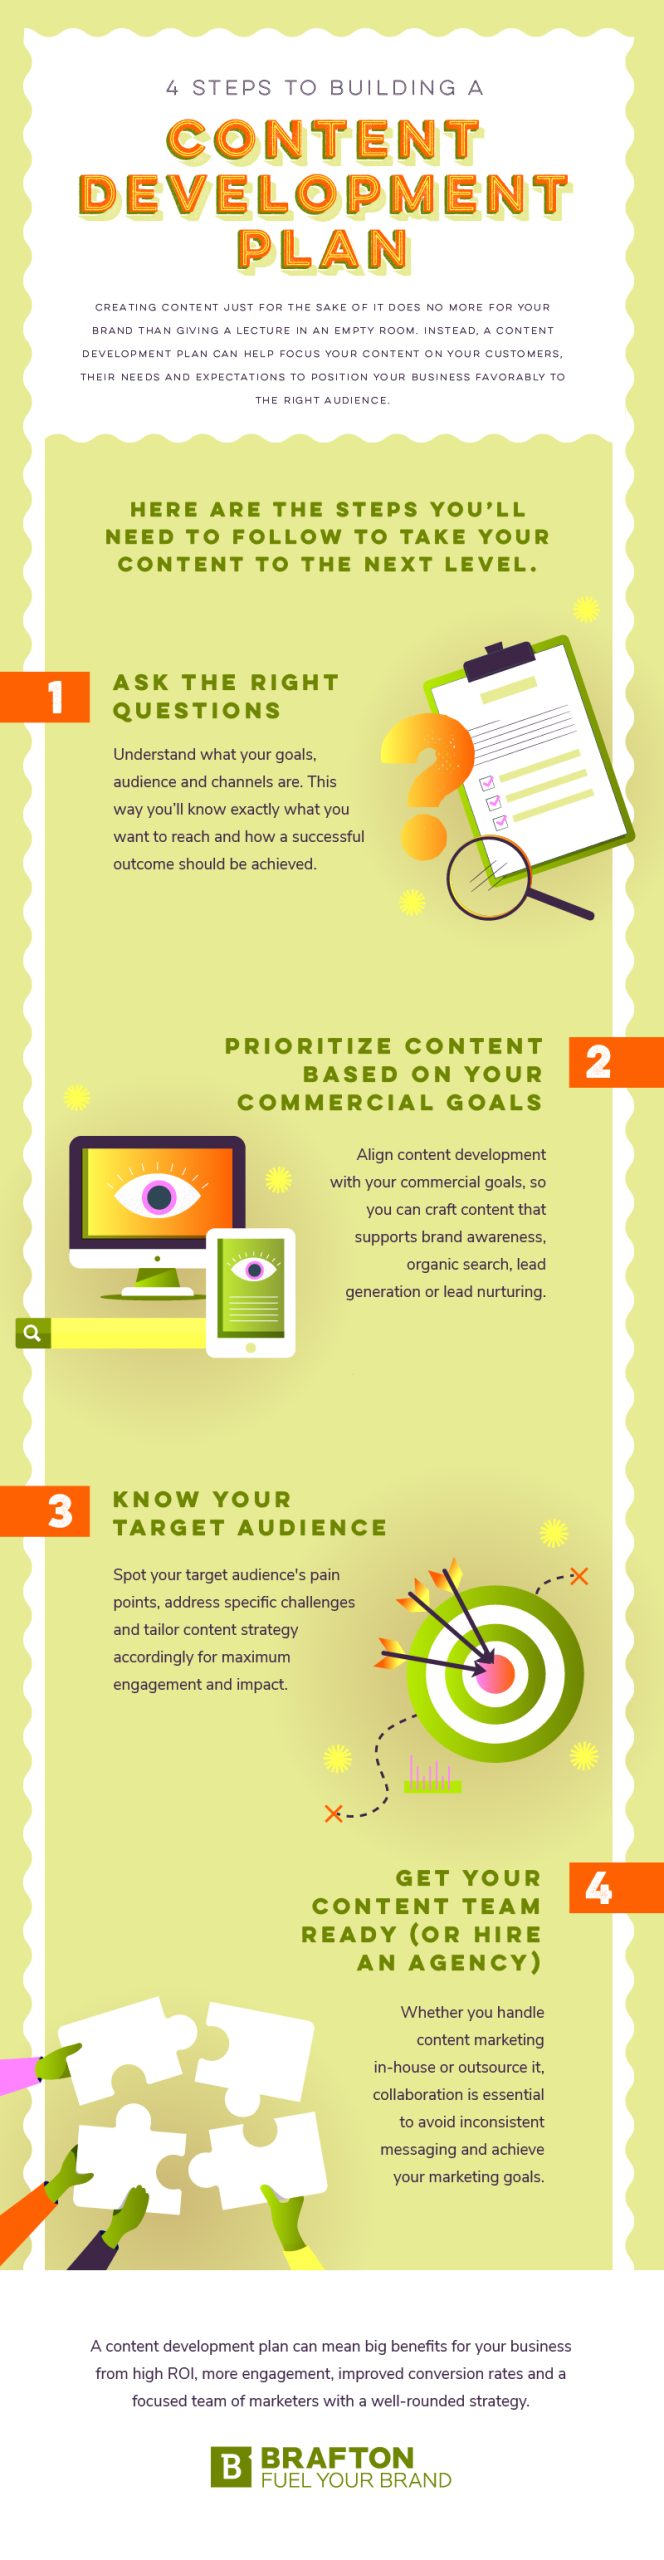 Infographic 4 Steps to Building a Content Development Plan